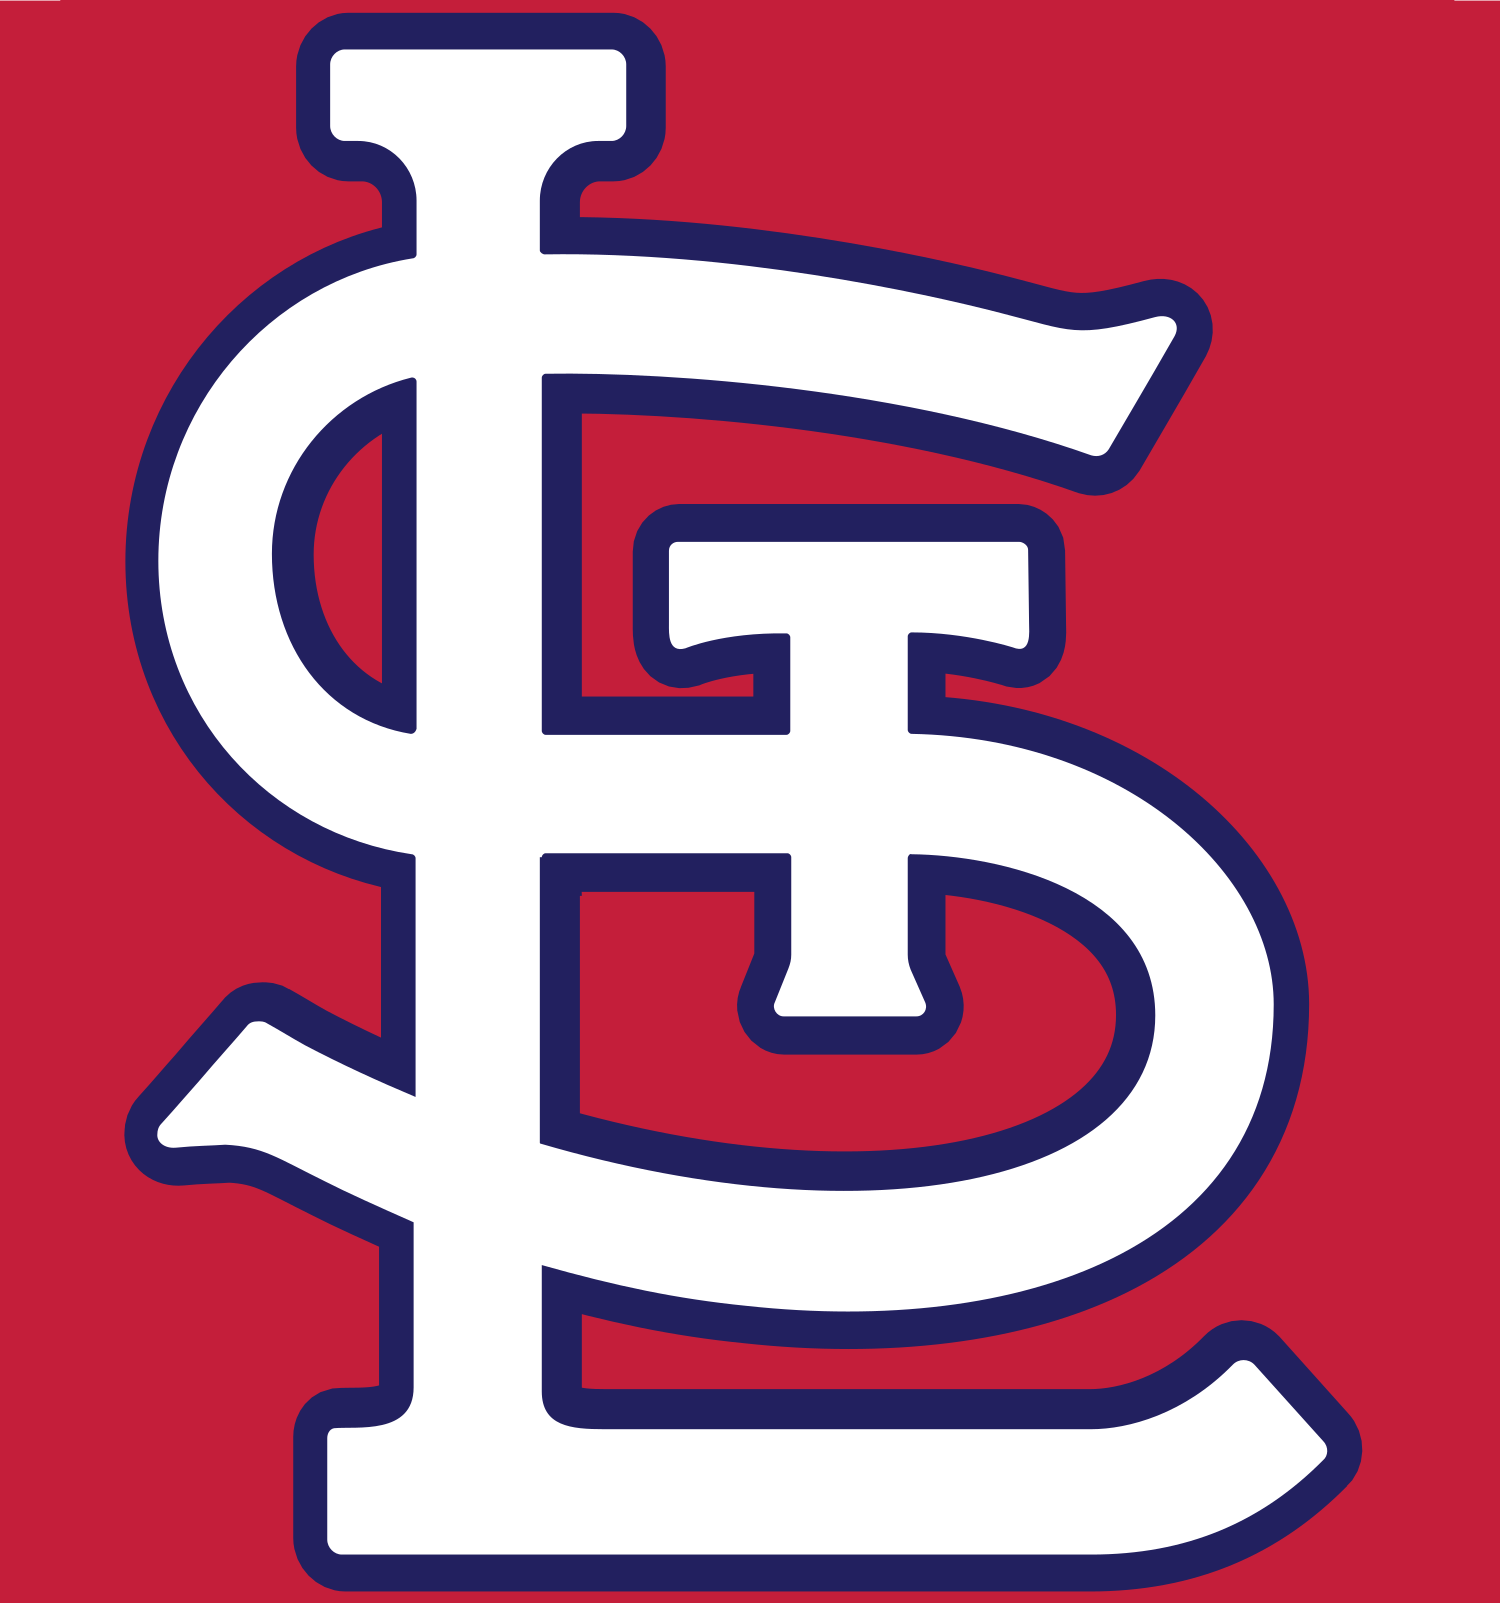 Brock named to St. Louis Cardinals 'Franchise Four' - Southern University